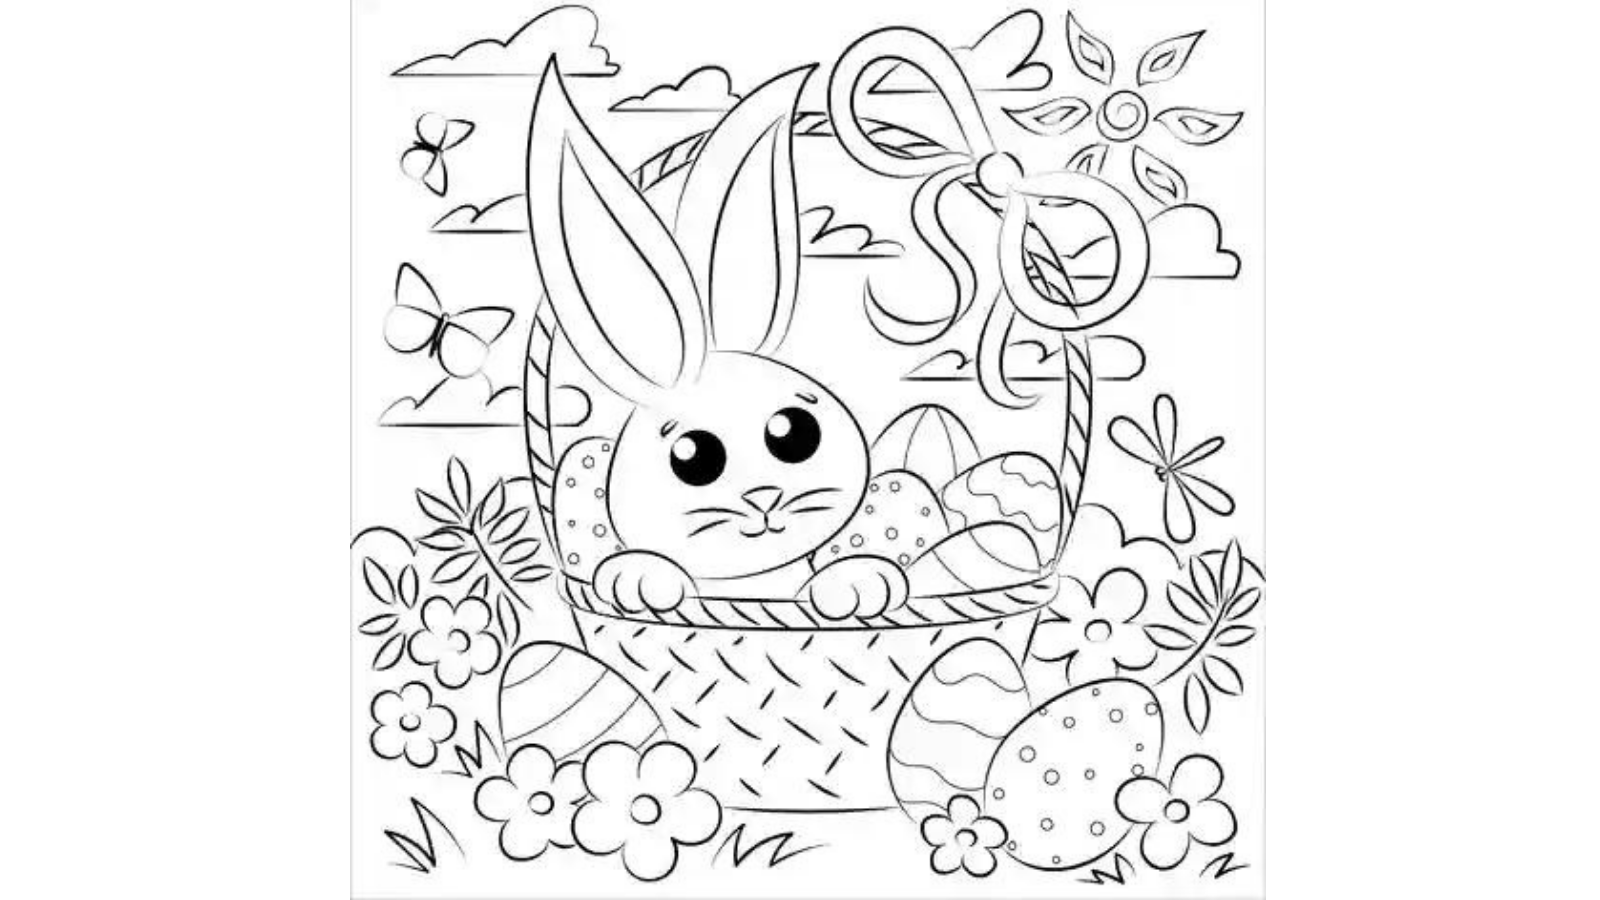 Techno gamer on x cute bunny with easter basket and eggs coloring pages follow us to get more free printable coloring pages httpstcoraguvlyxt coloringpages coloringpagesforadults coloringpagesforkids coloringbook cute easterbunny